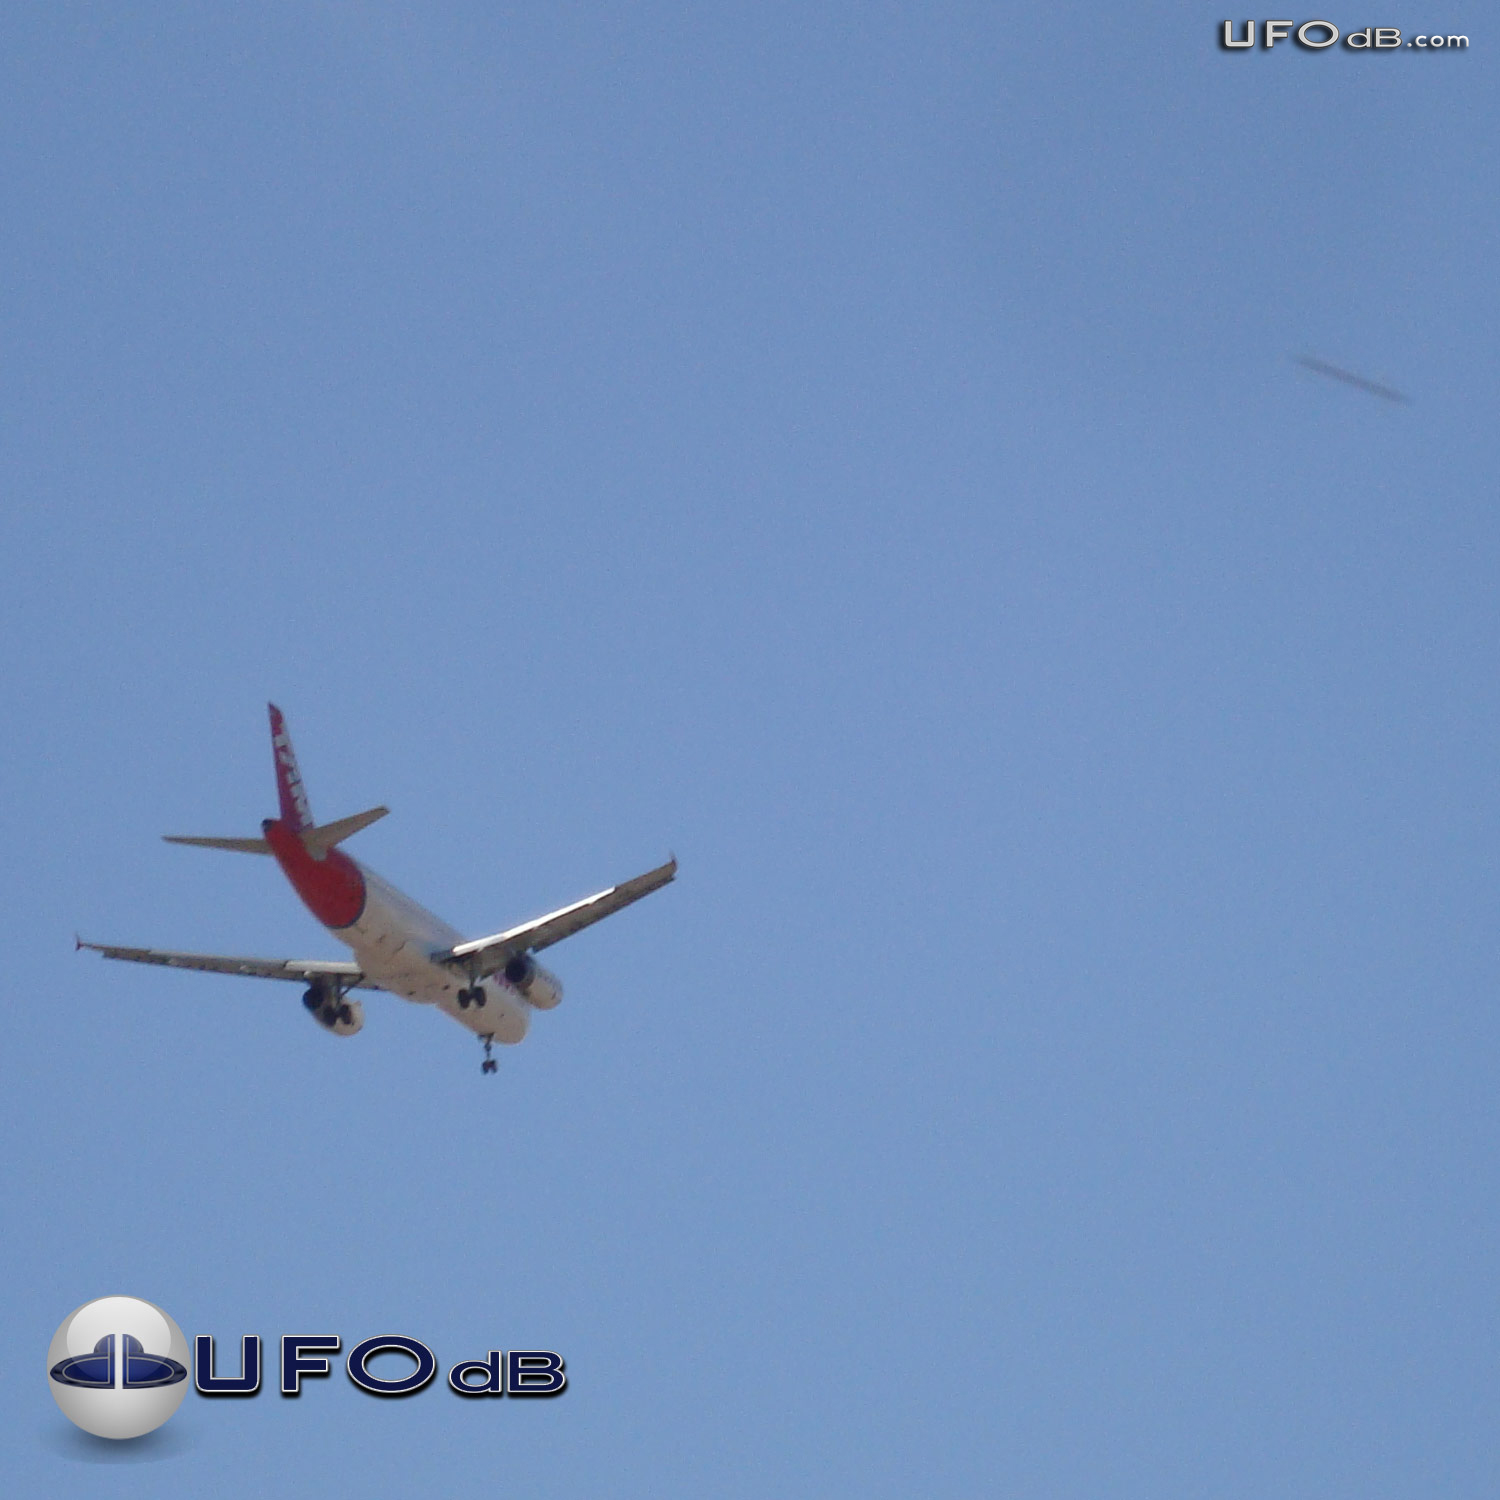 Guarulhos Airport, Brazil | UFO near airplane taking off | April 2011 UFO Picture #337-1